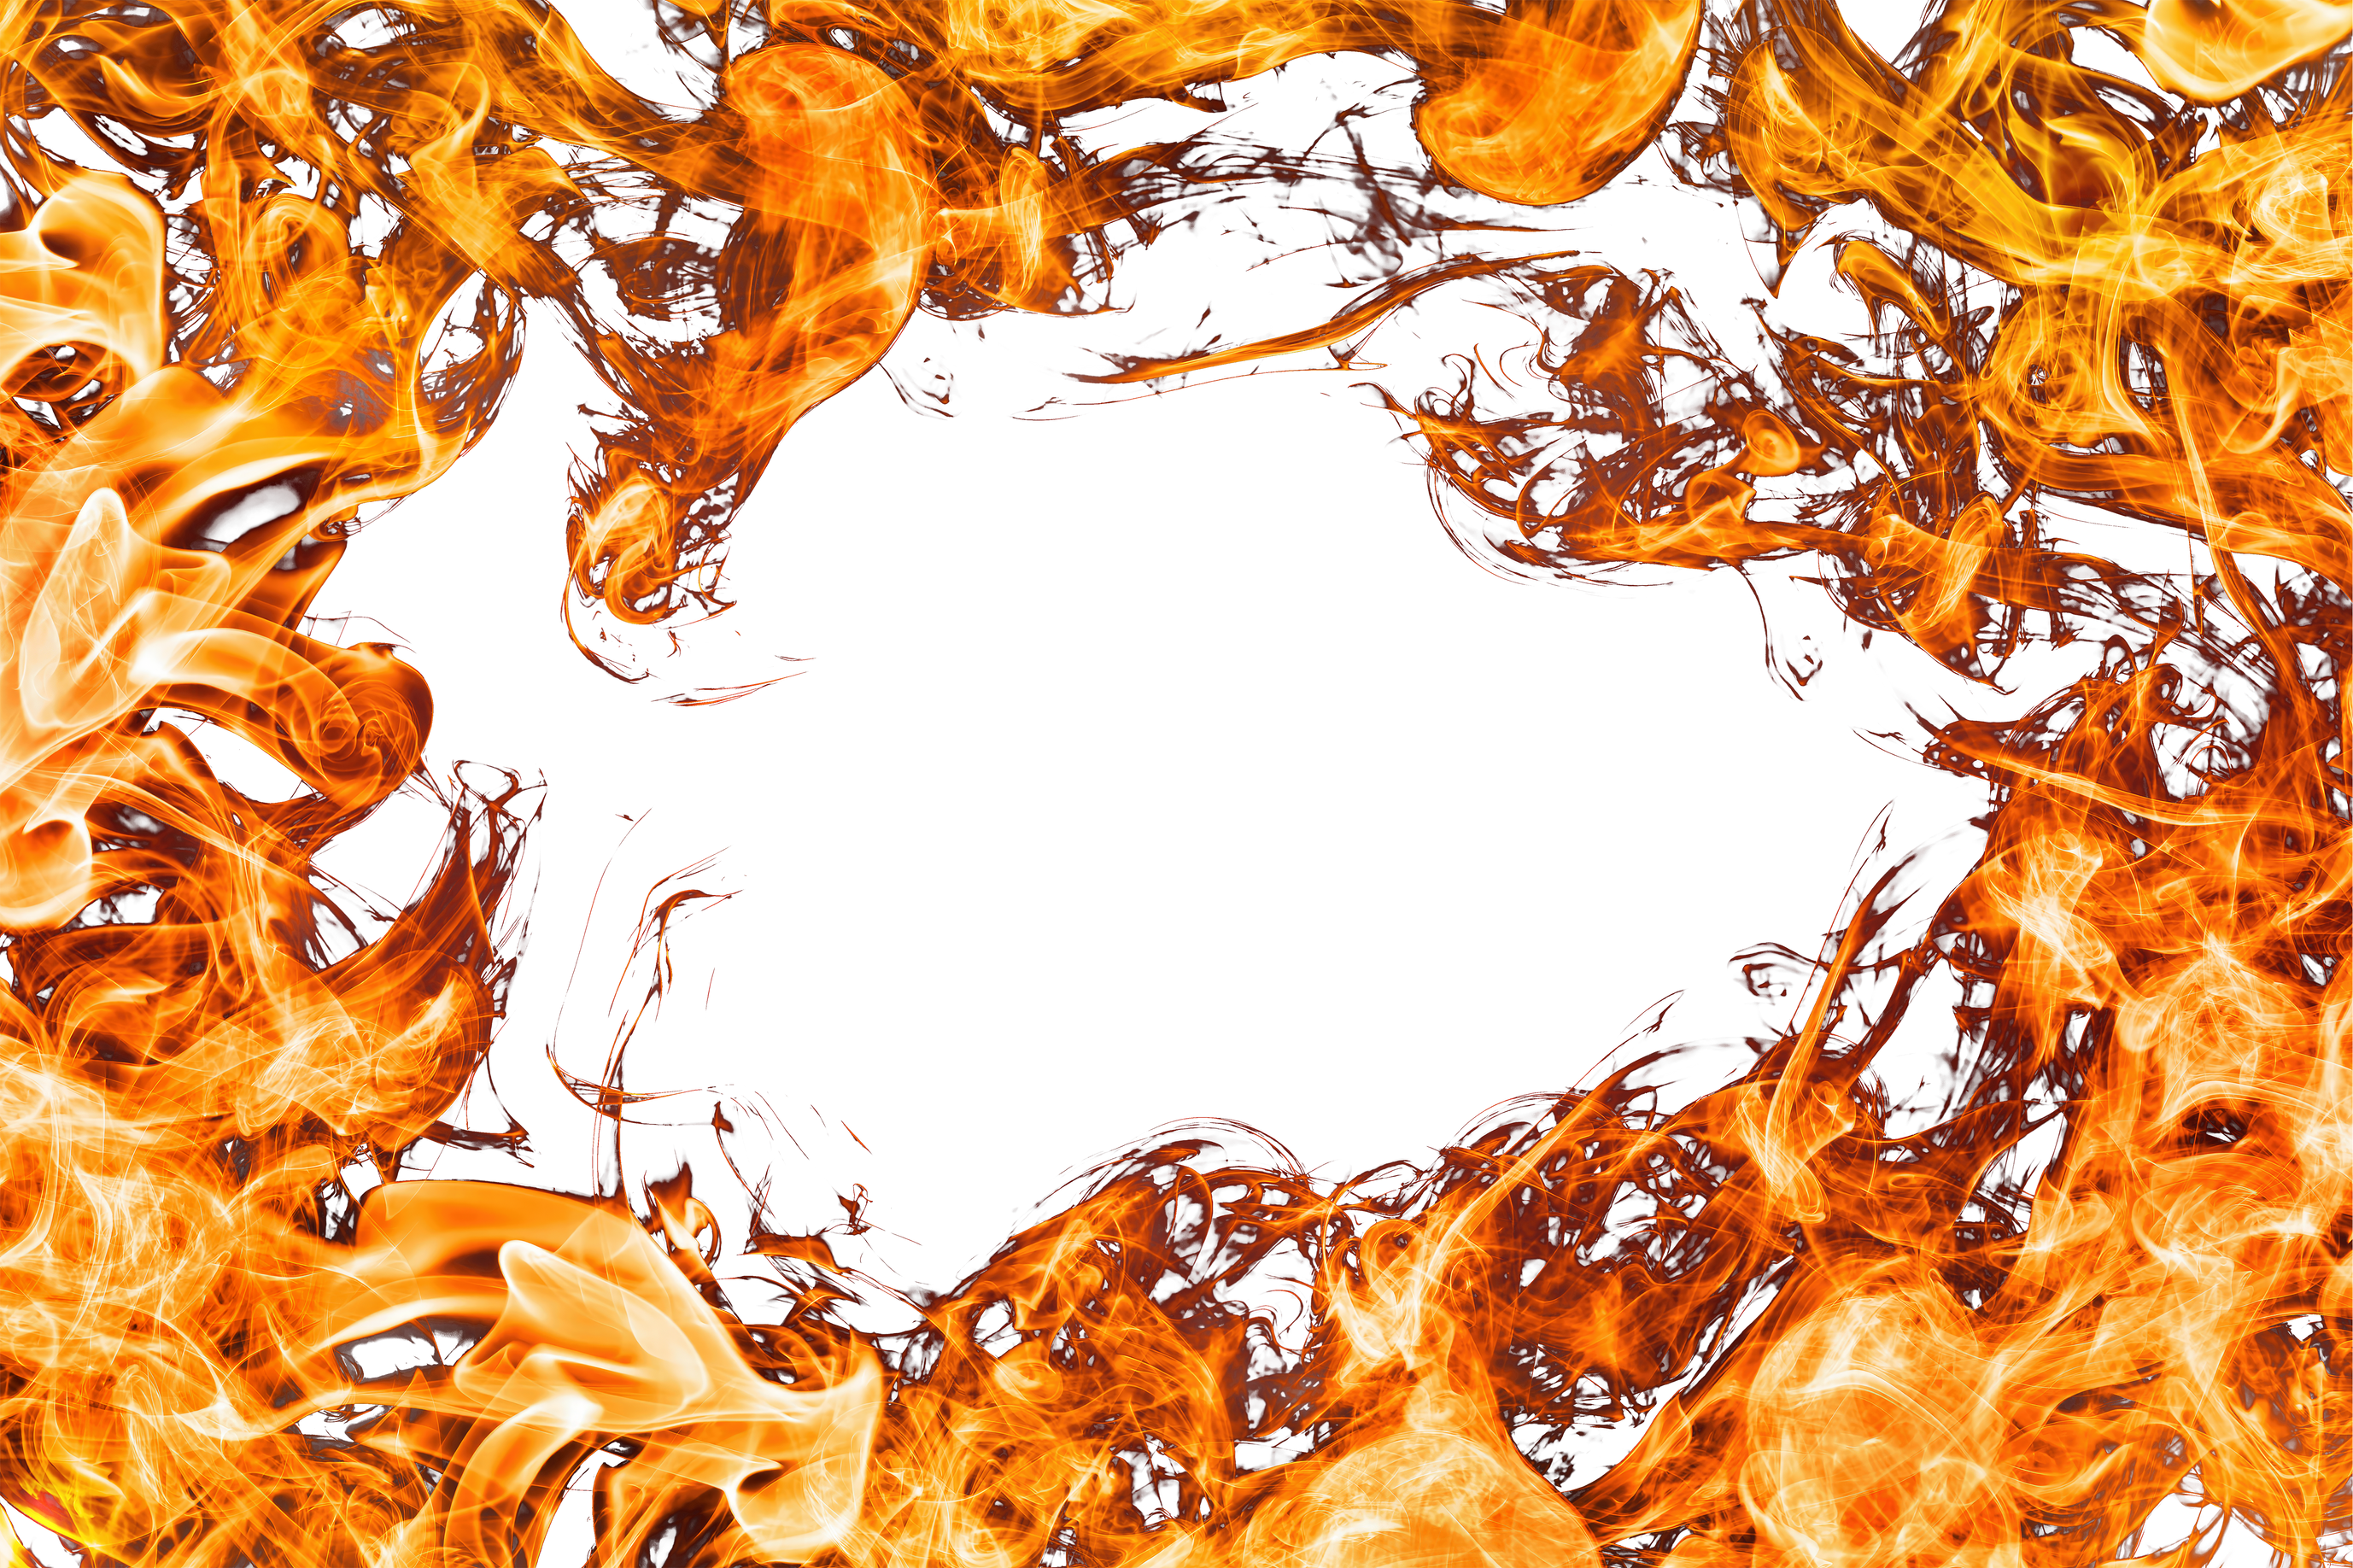 Fire flames burn overlay on transparent background